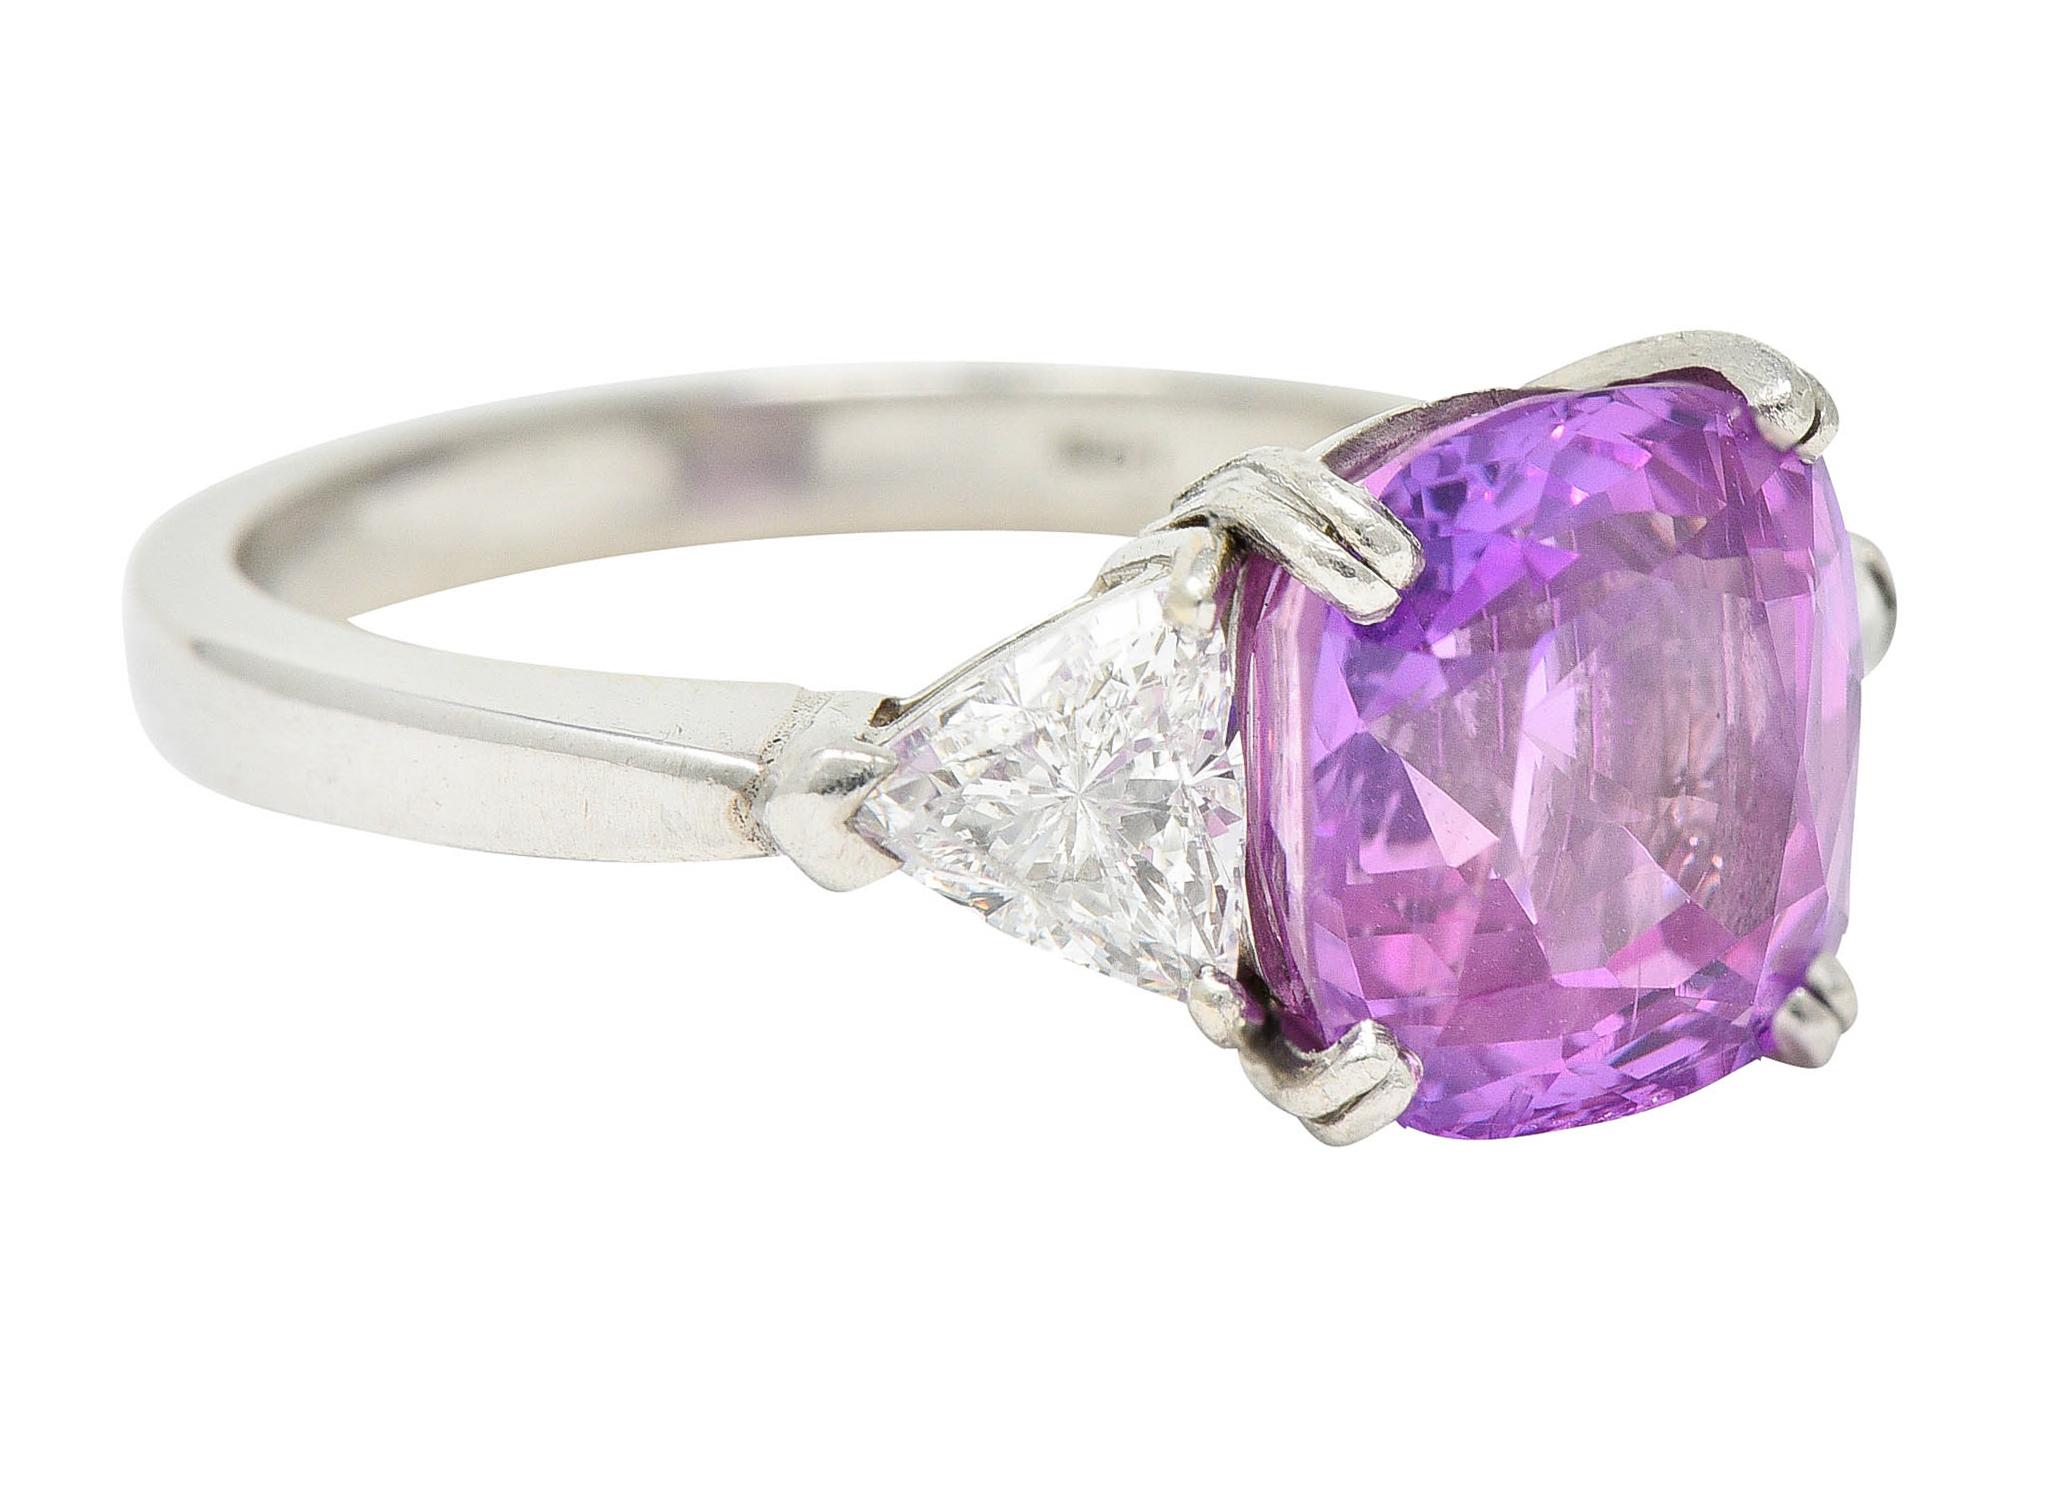 Three stone ring centers a cushion cut pink sapphire

Violetish pink in color while weighing approximately 5.40 carats

Basket set with split prongs and flanked by trilliant cut diamonds

Weighing in total approximately 0.80 carat with H/I color and